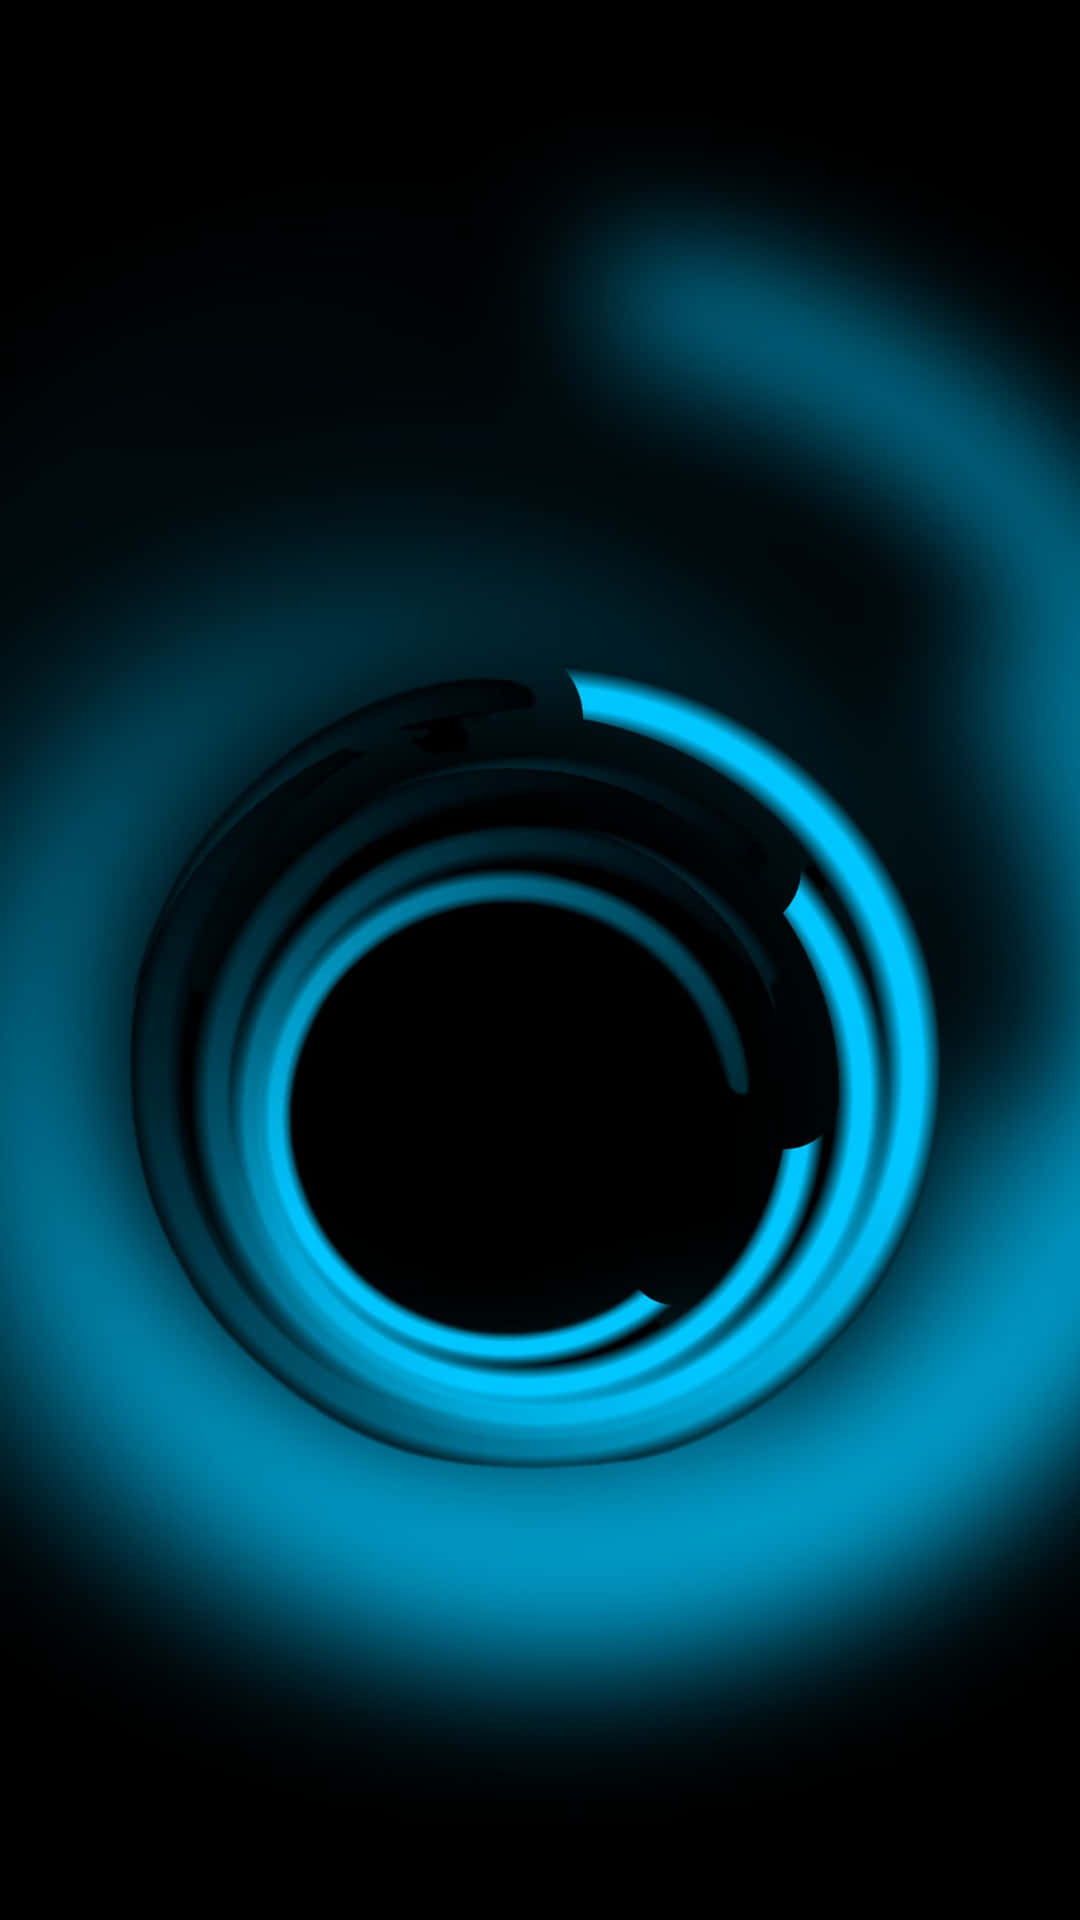 A Blue Circle With A Blue Light In It